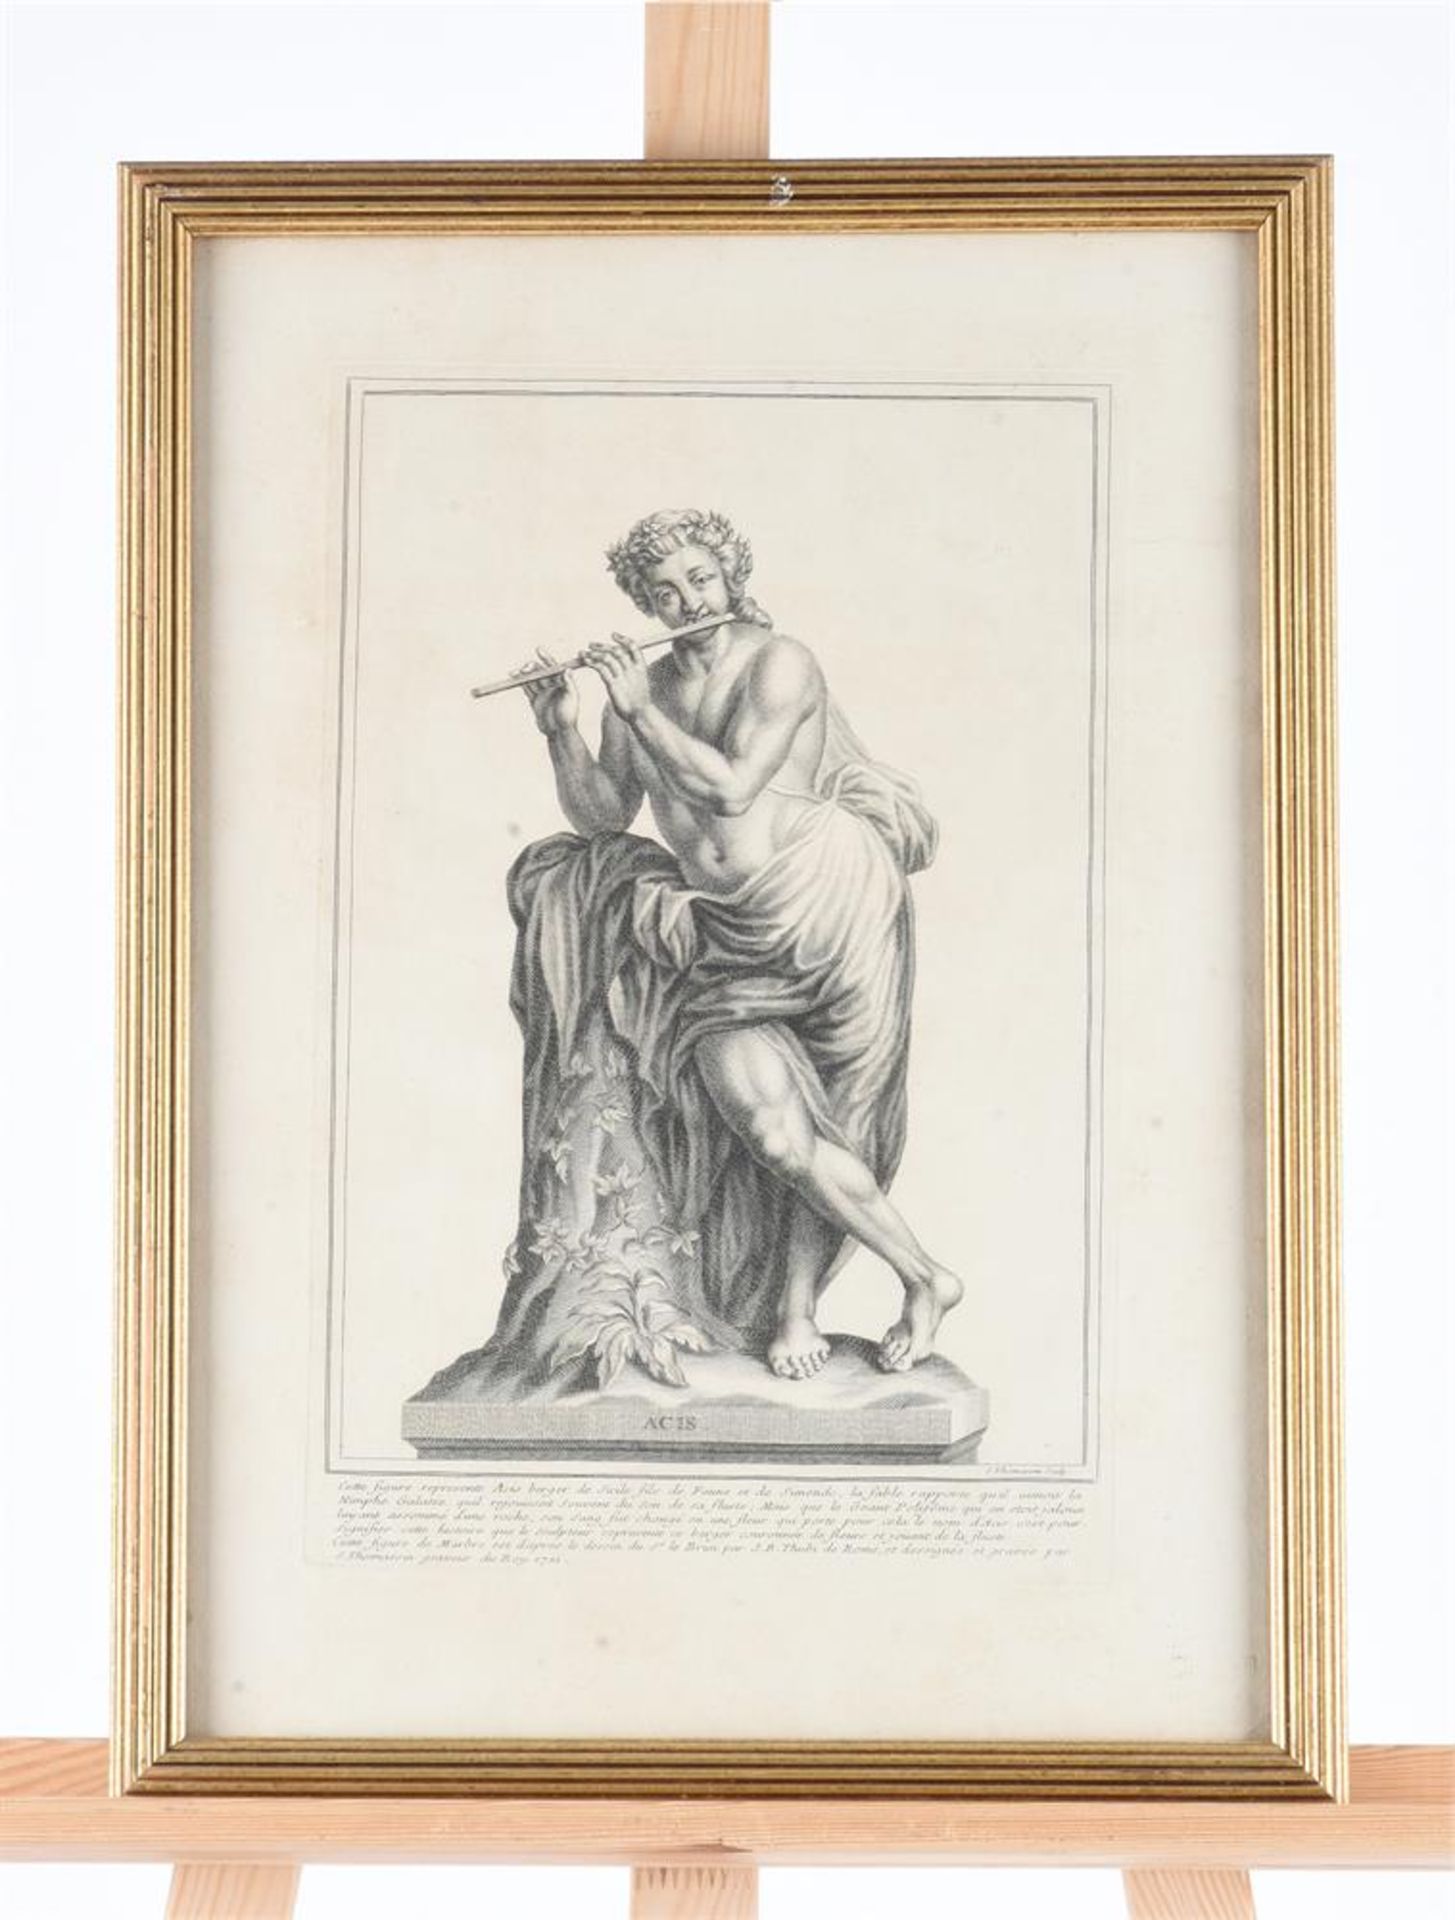 A SET OF TEN 17-18TH CENTURY ENGRAVINGS OF CLASSICAL AND RENAISSANCE STATUARY - Image 11 of 11